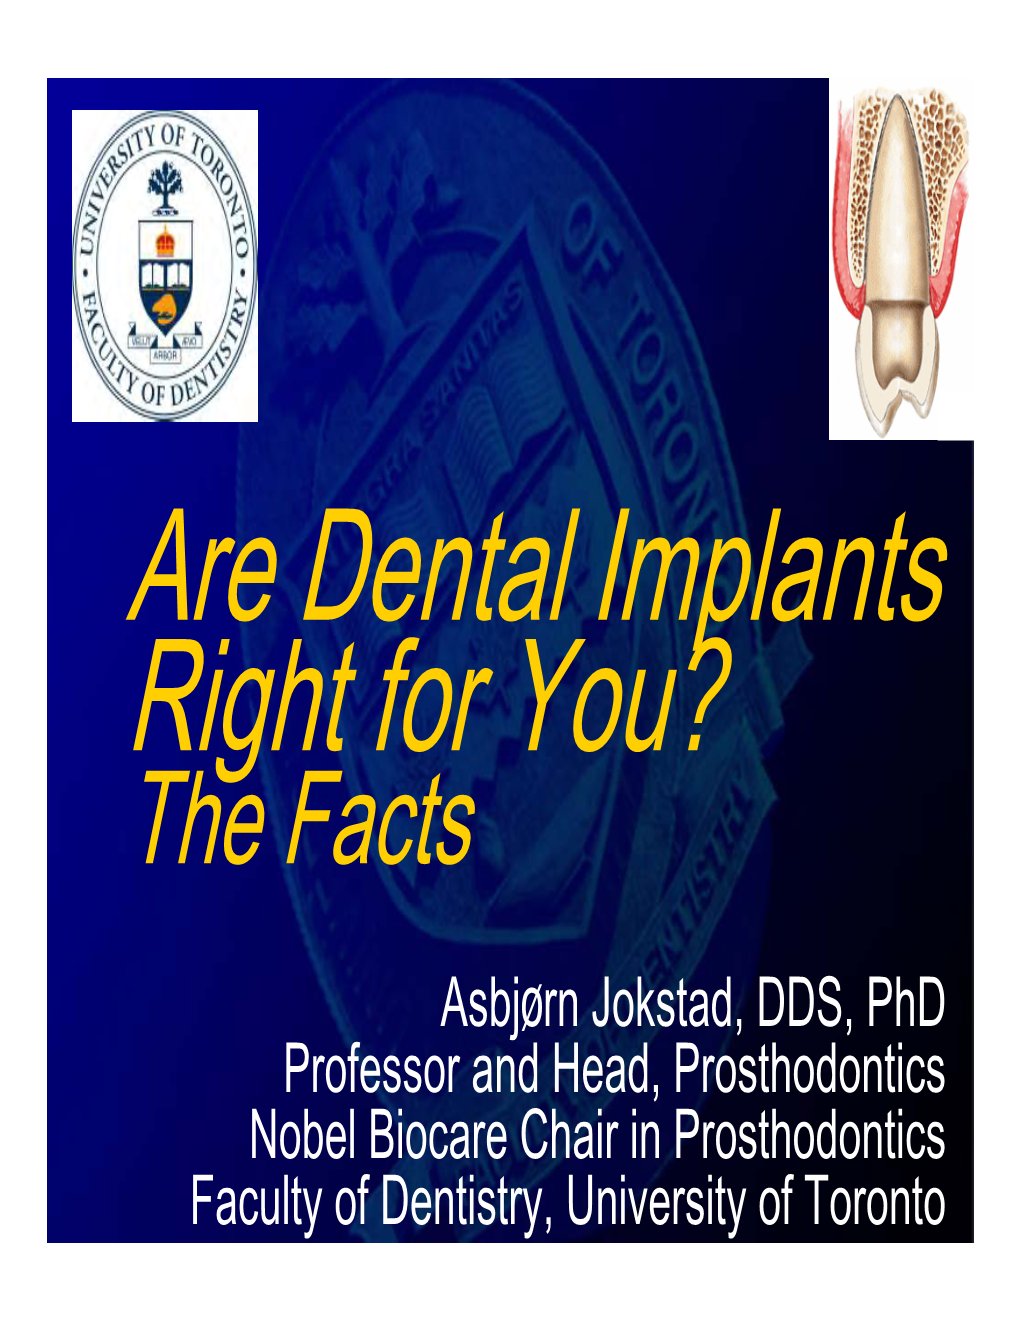 Are Implants Right for You?